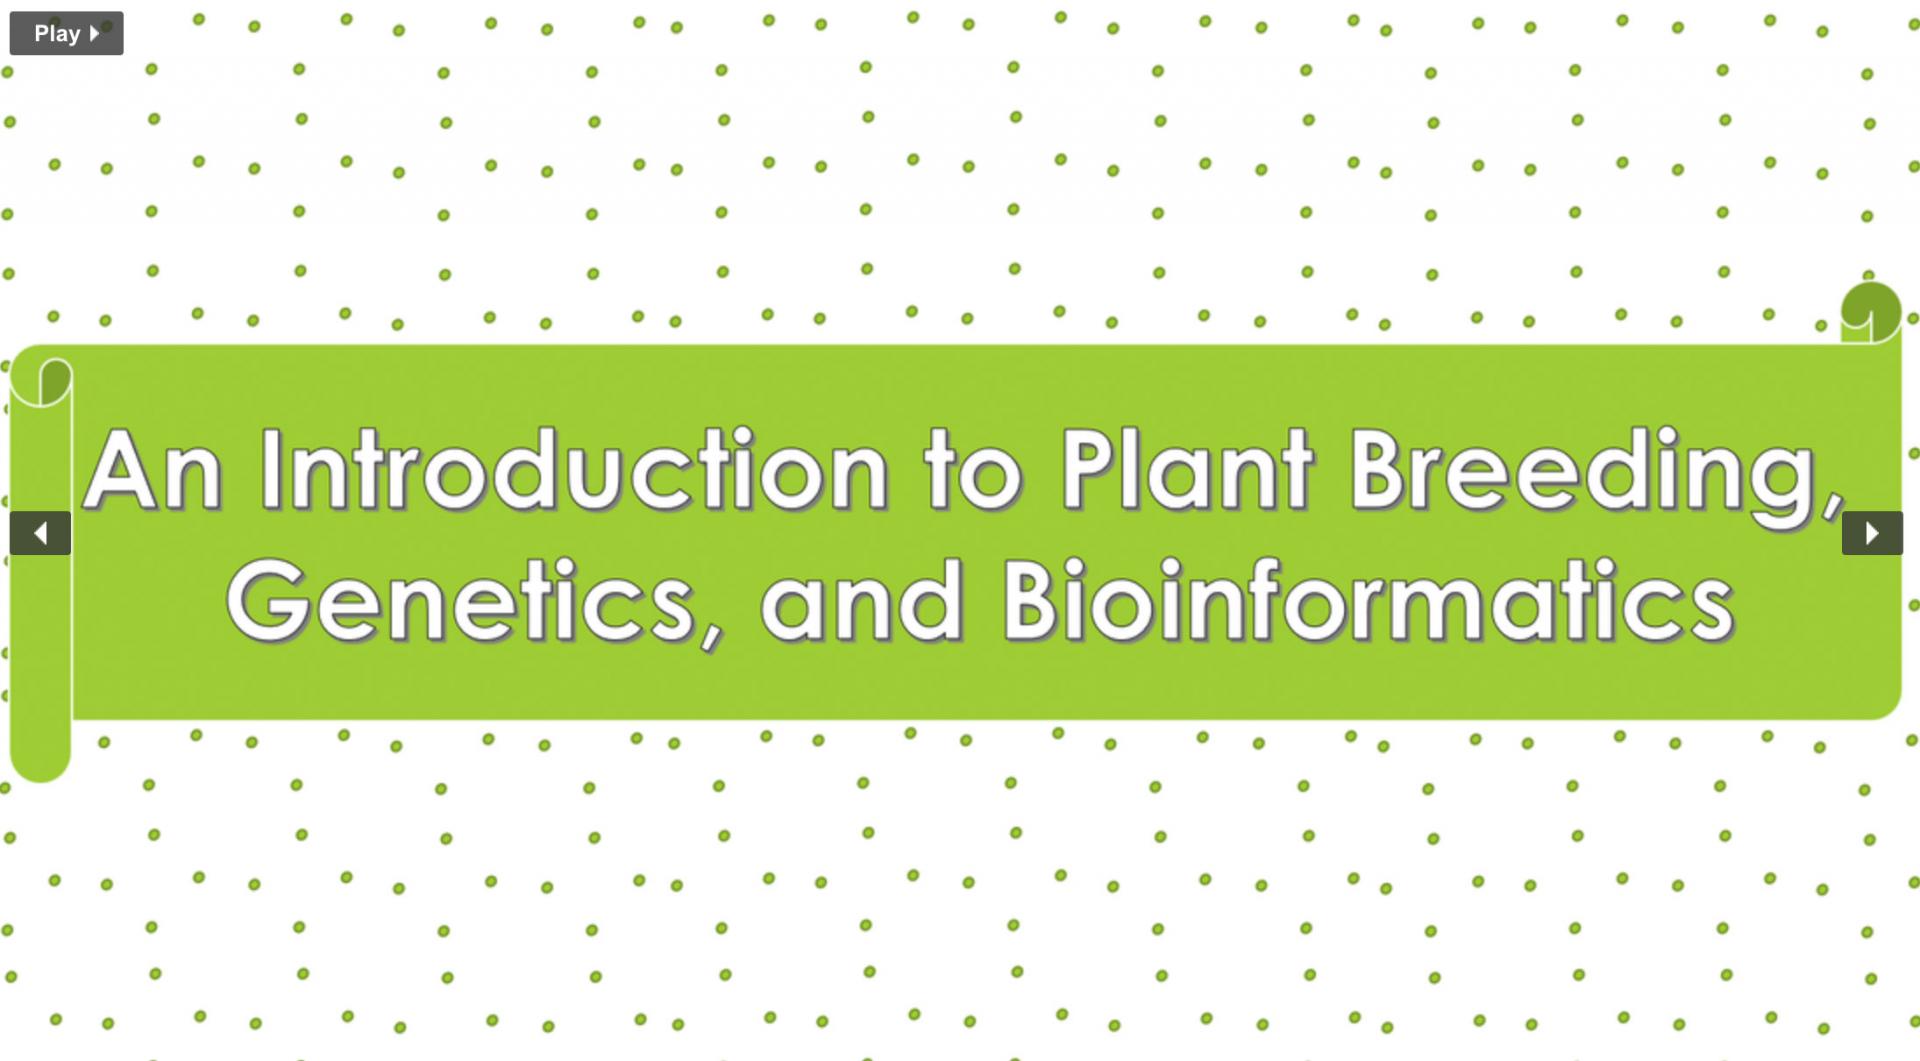 An Introduction to Plant Breeding, Genetics and Bioinformatics show